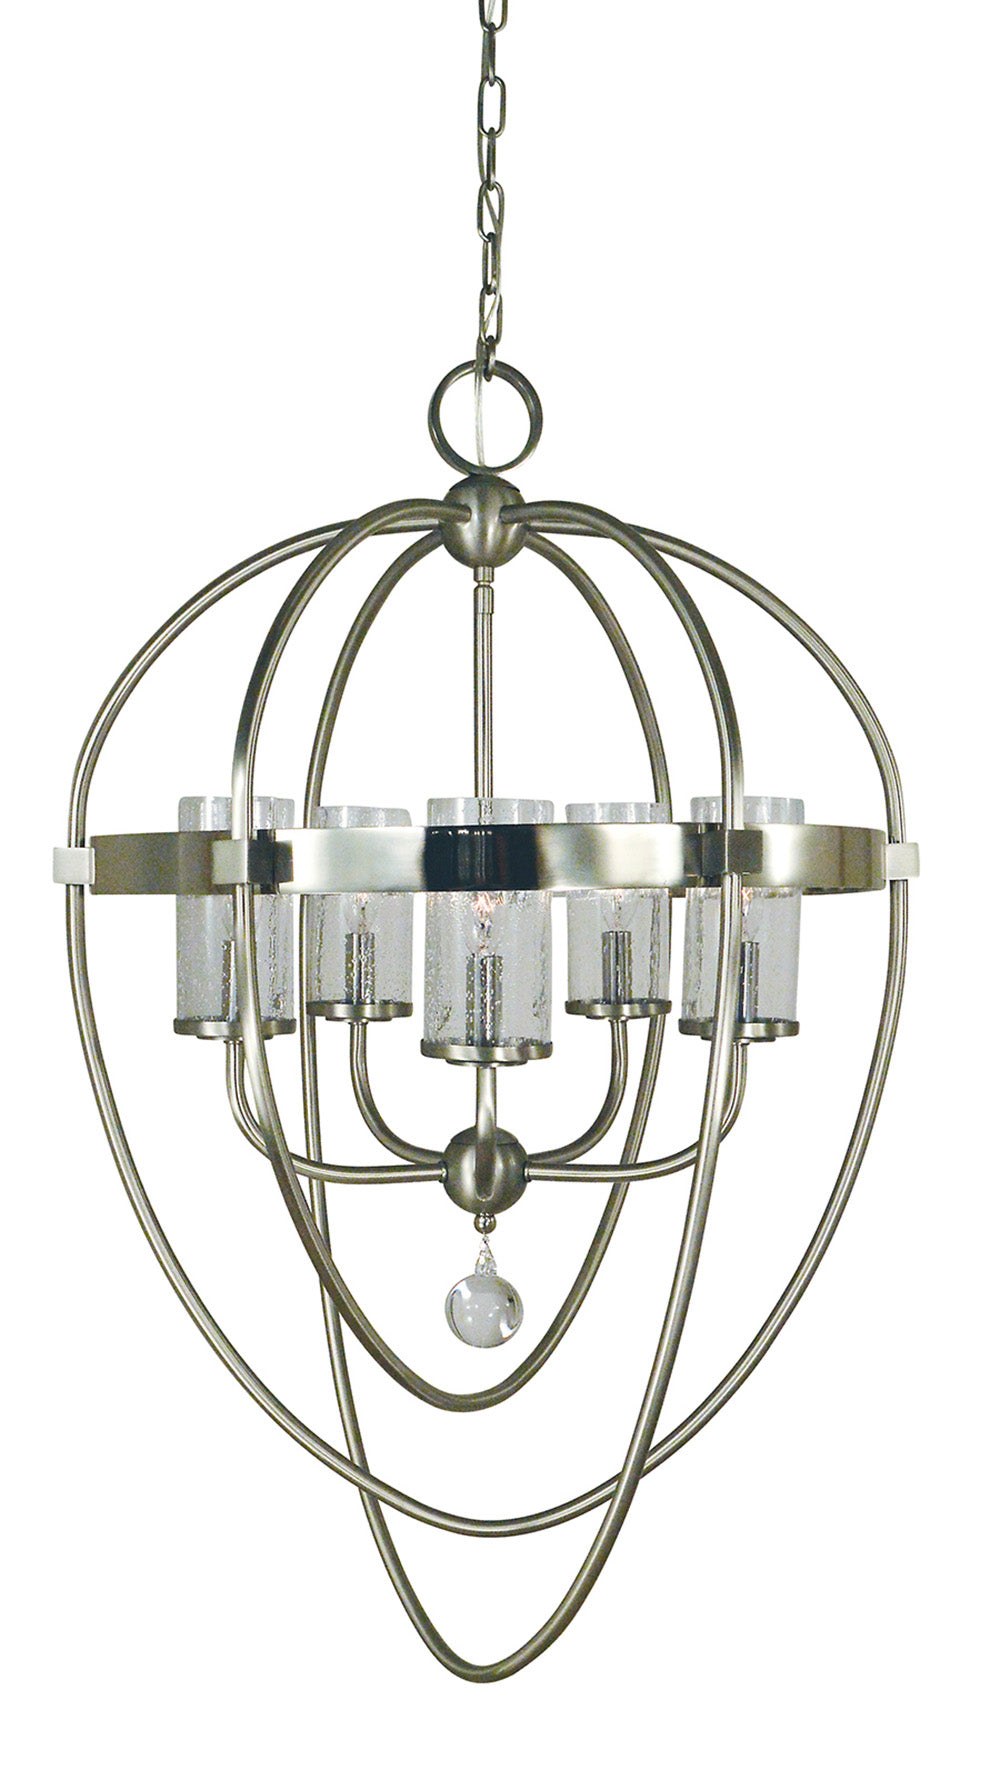 Framburg Margaux 5 - Light Brushed Nickel with Polished Nickel Accents Foyer Chandelier 3045 BN/PN